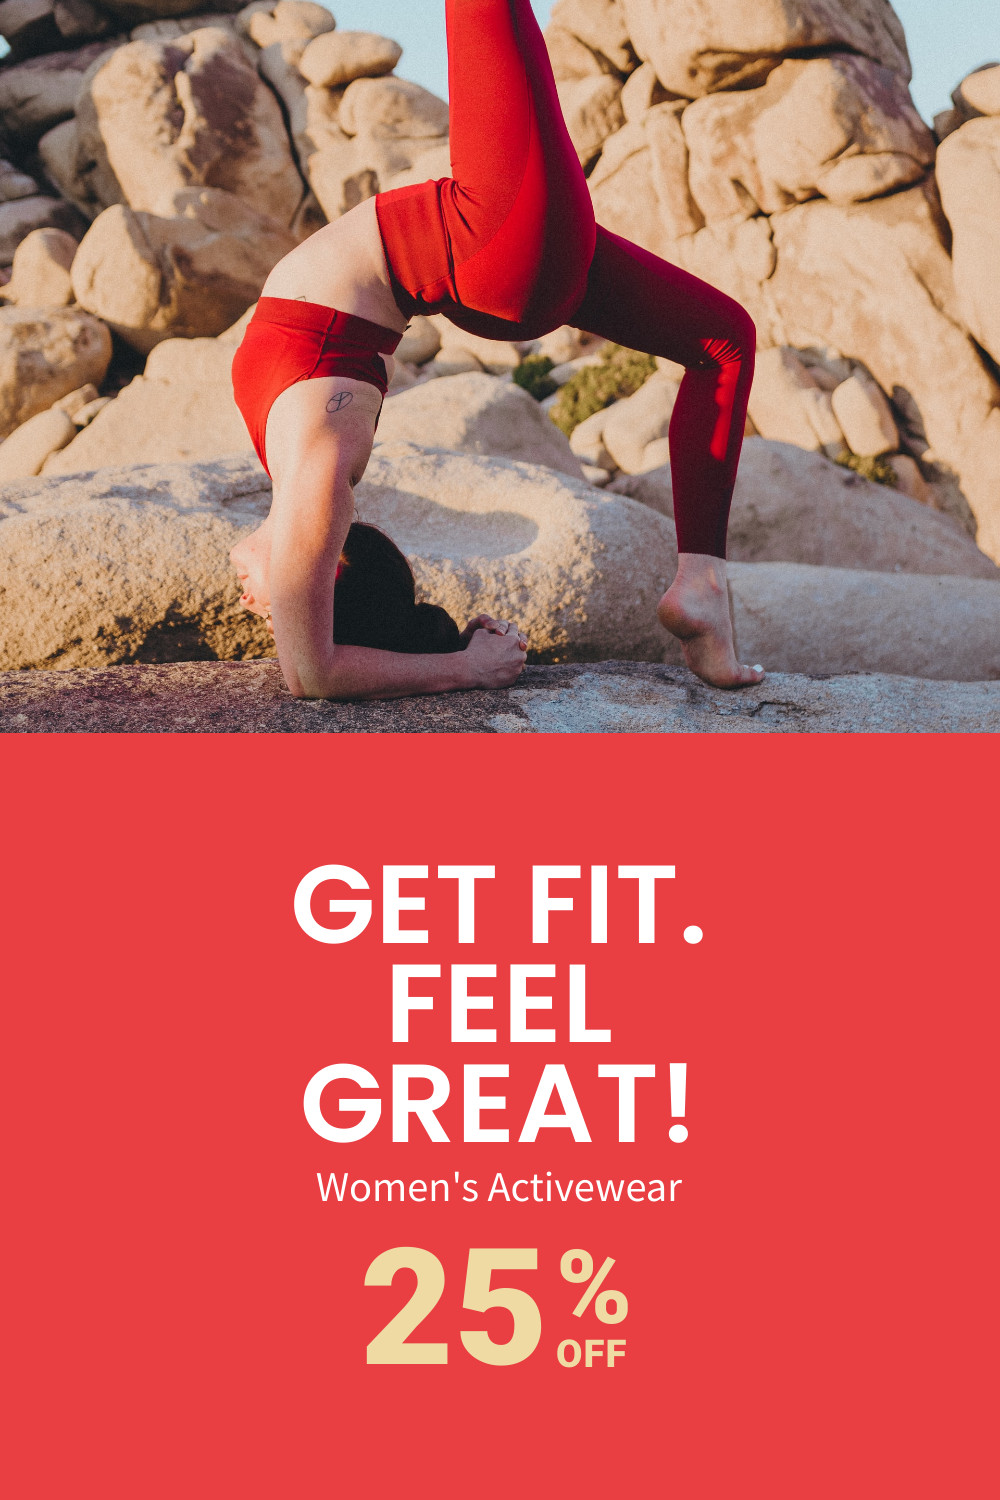 Get Fit with Women's Activewear